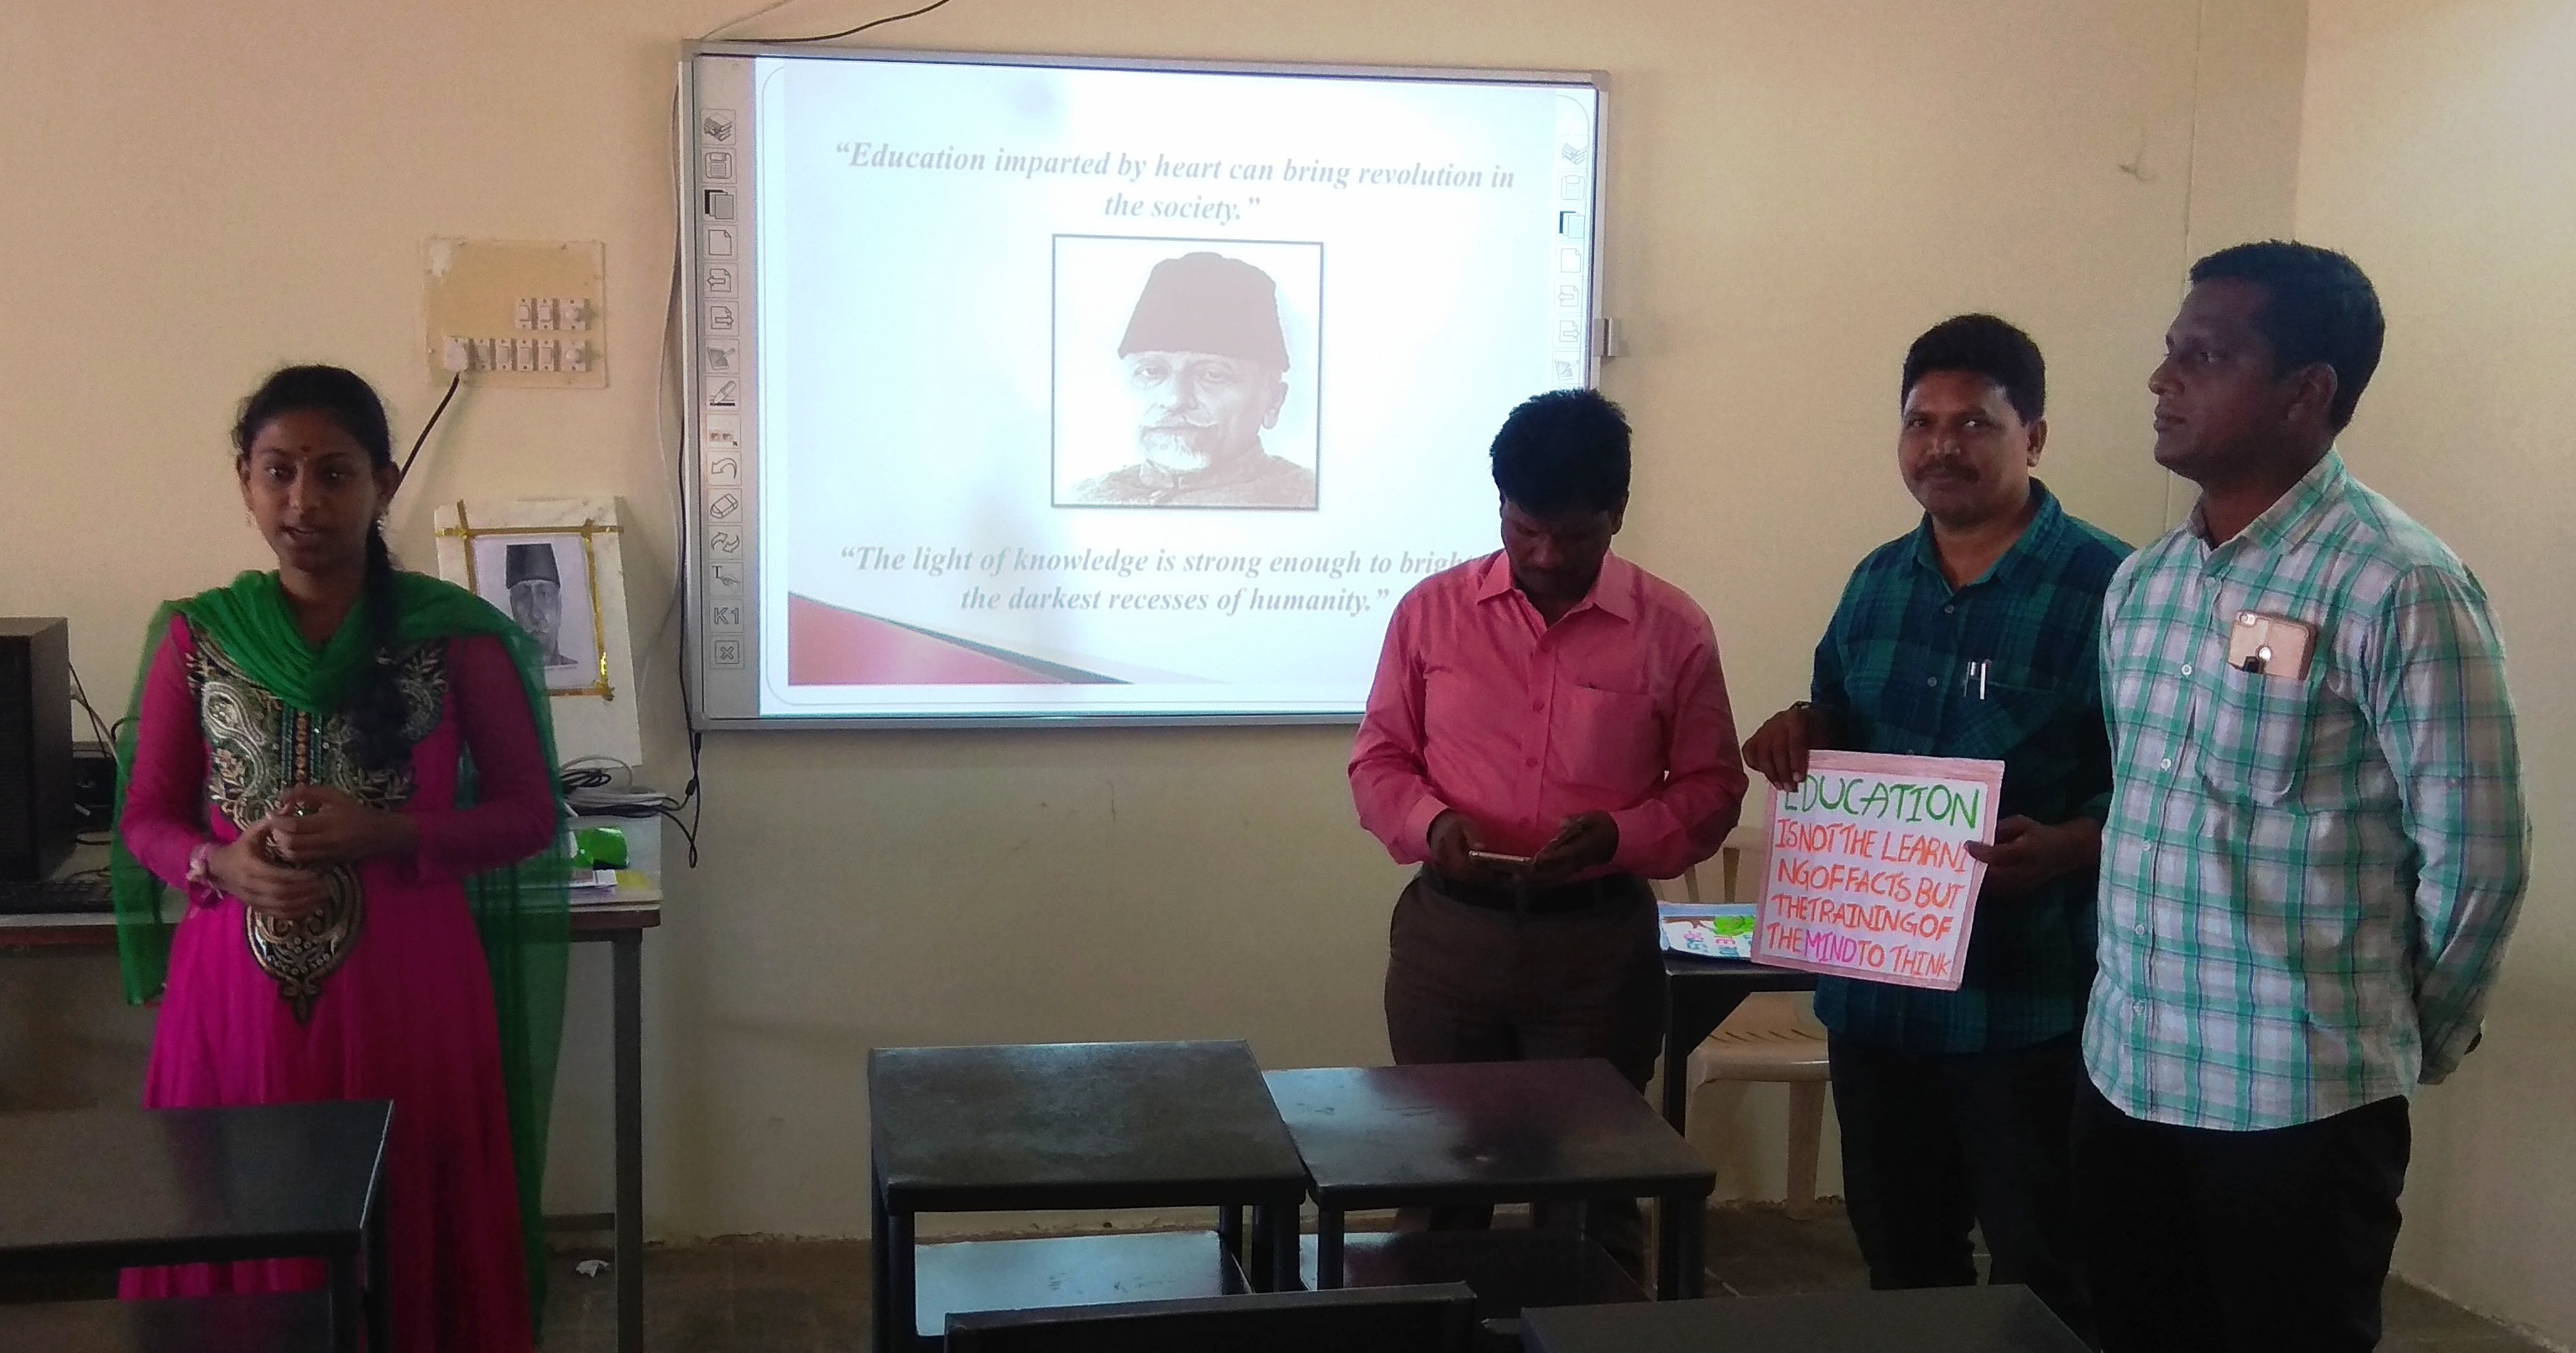 poster presentation on National Education Day by students